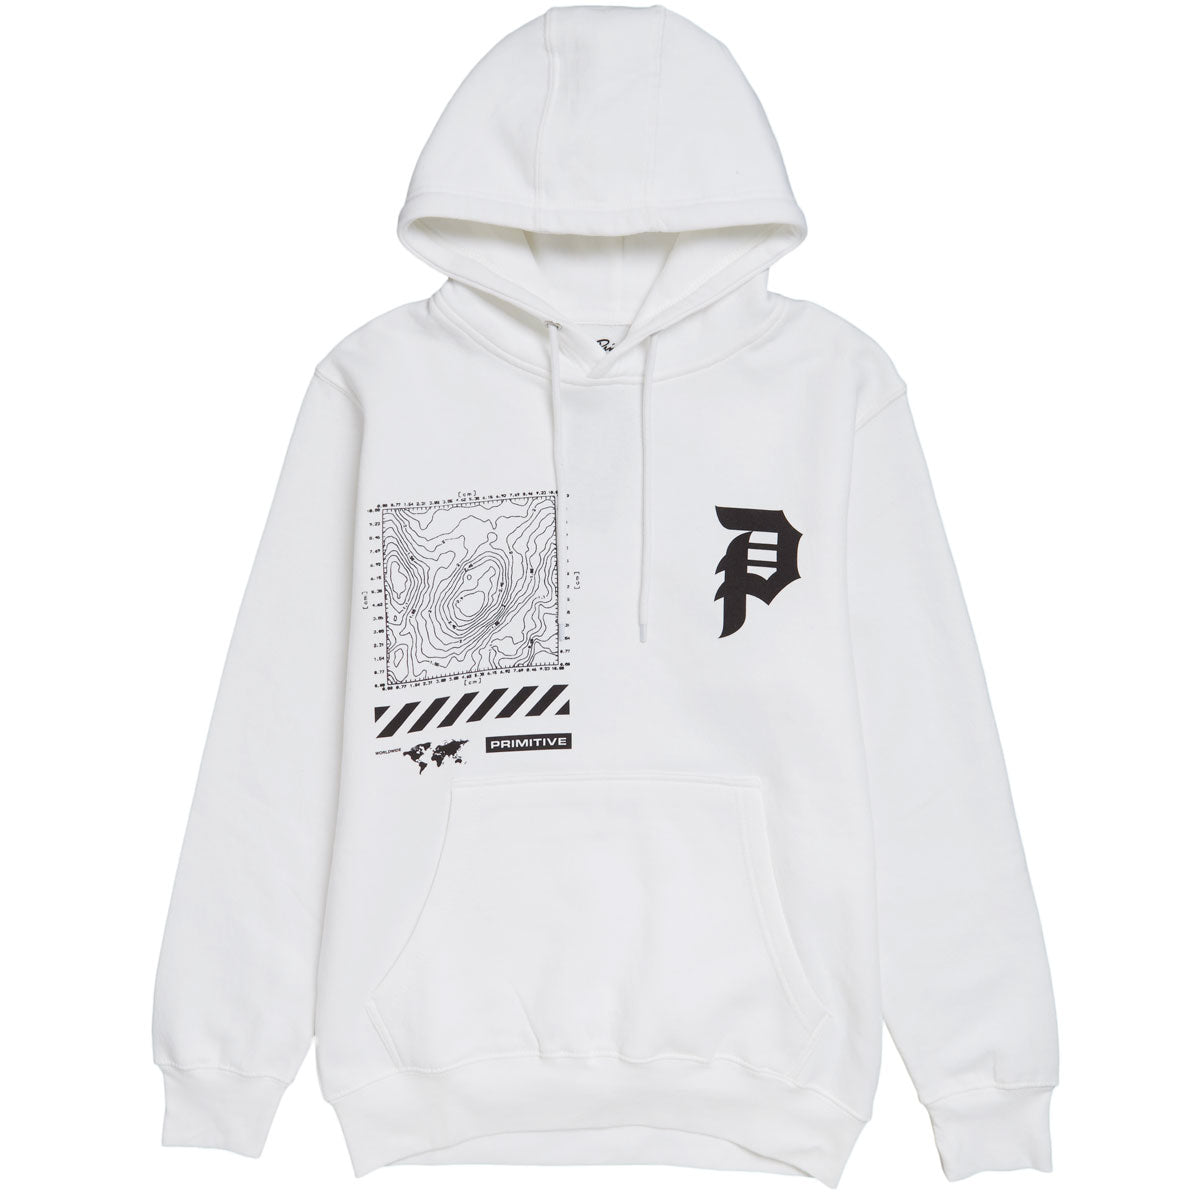 Primitive x Call Of Duty Mapping Dirty P Hoodie - White image 1